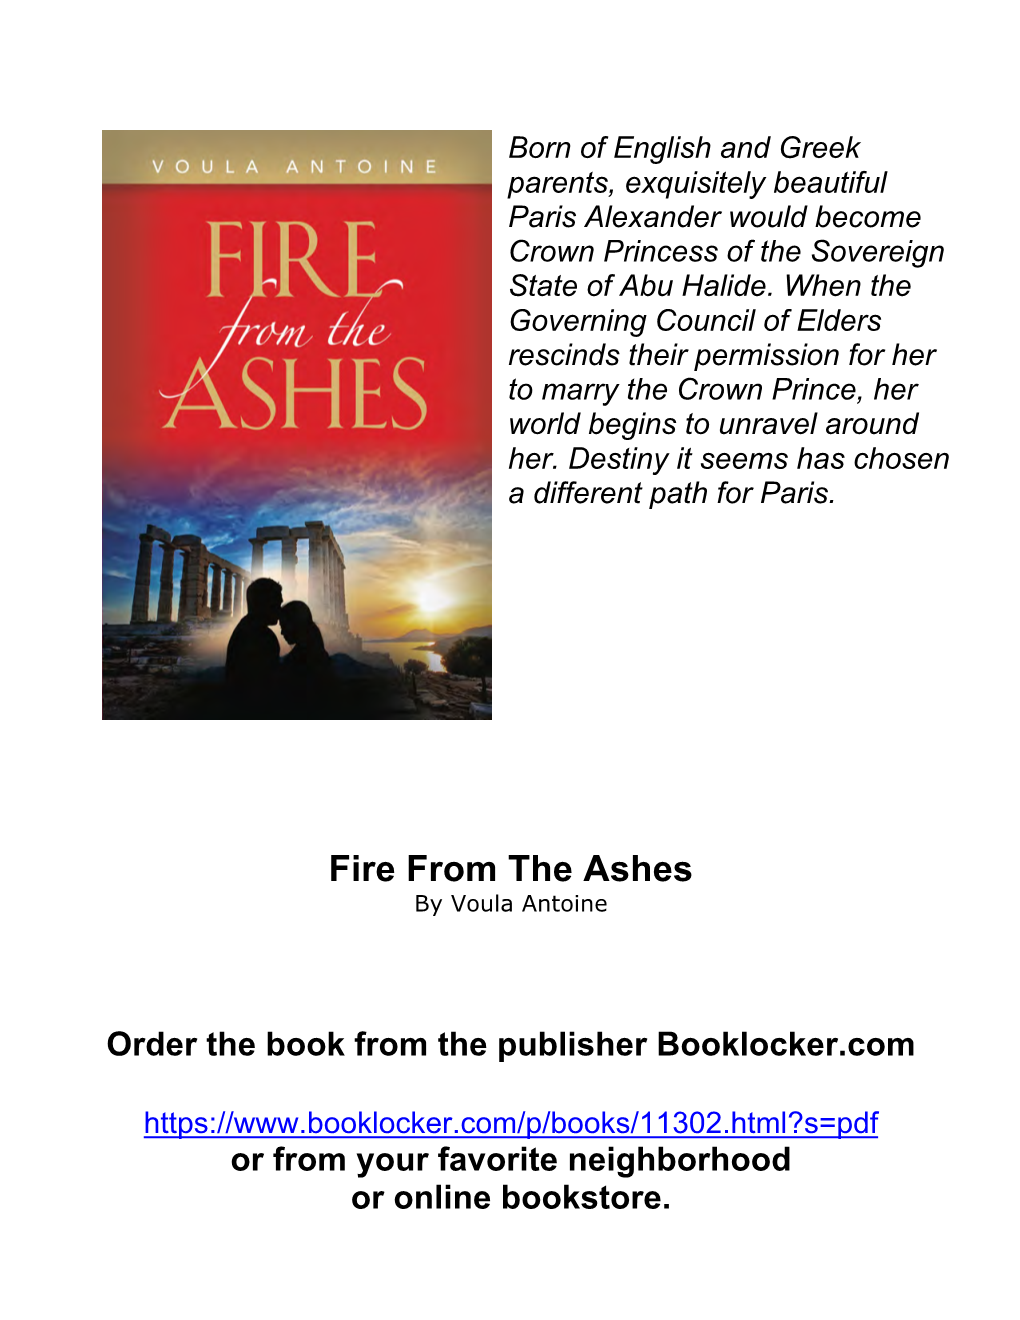 Fire from the Ashes by Voula Antoine